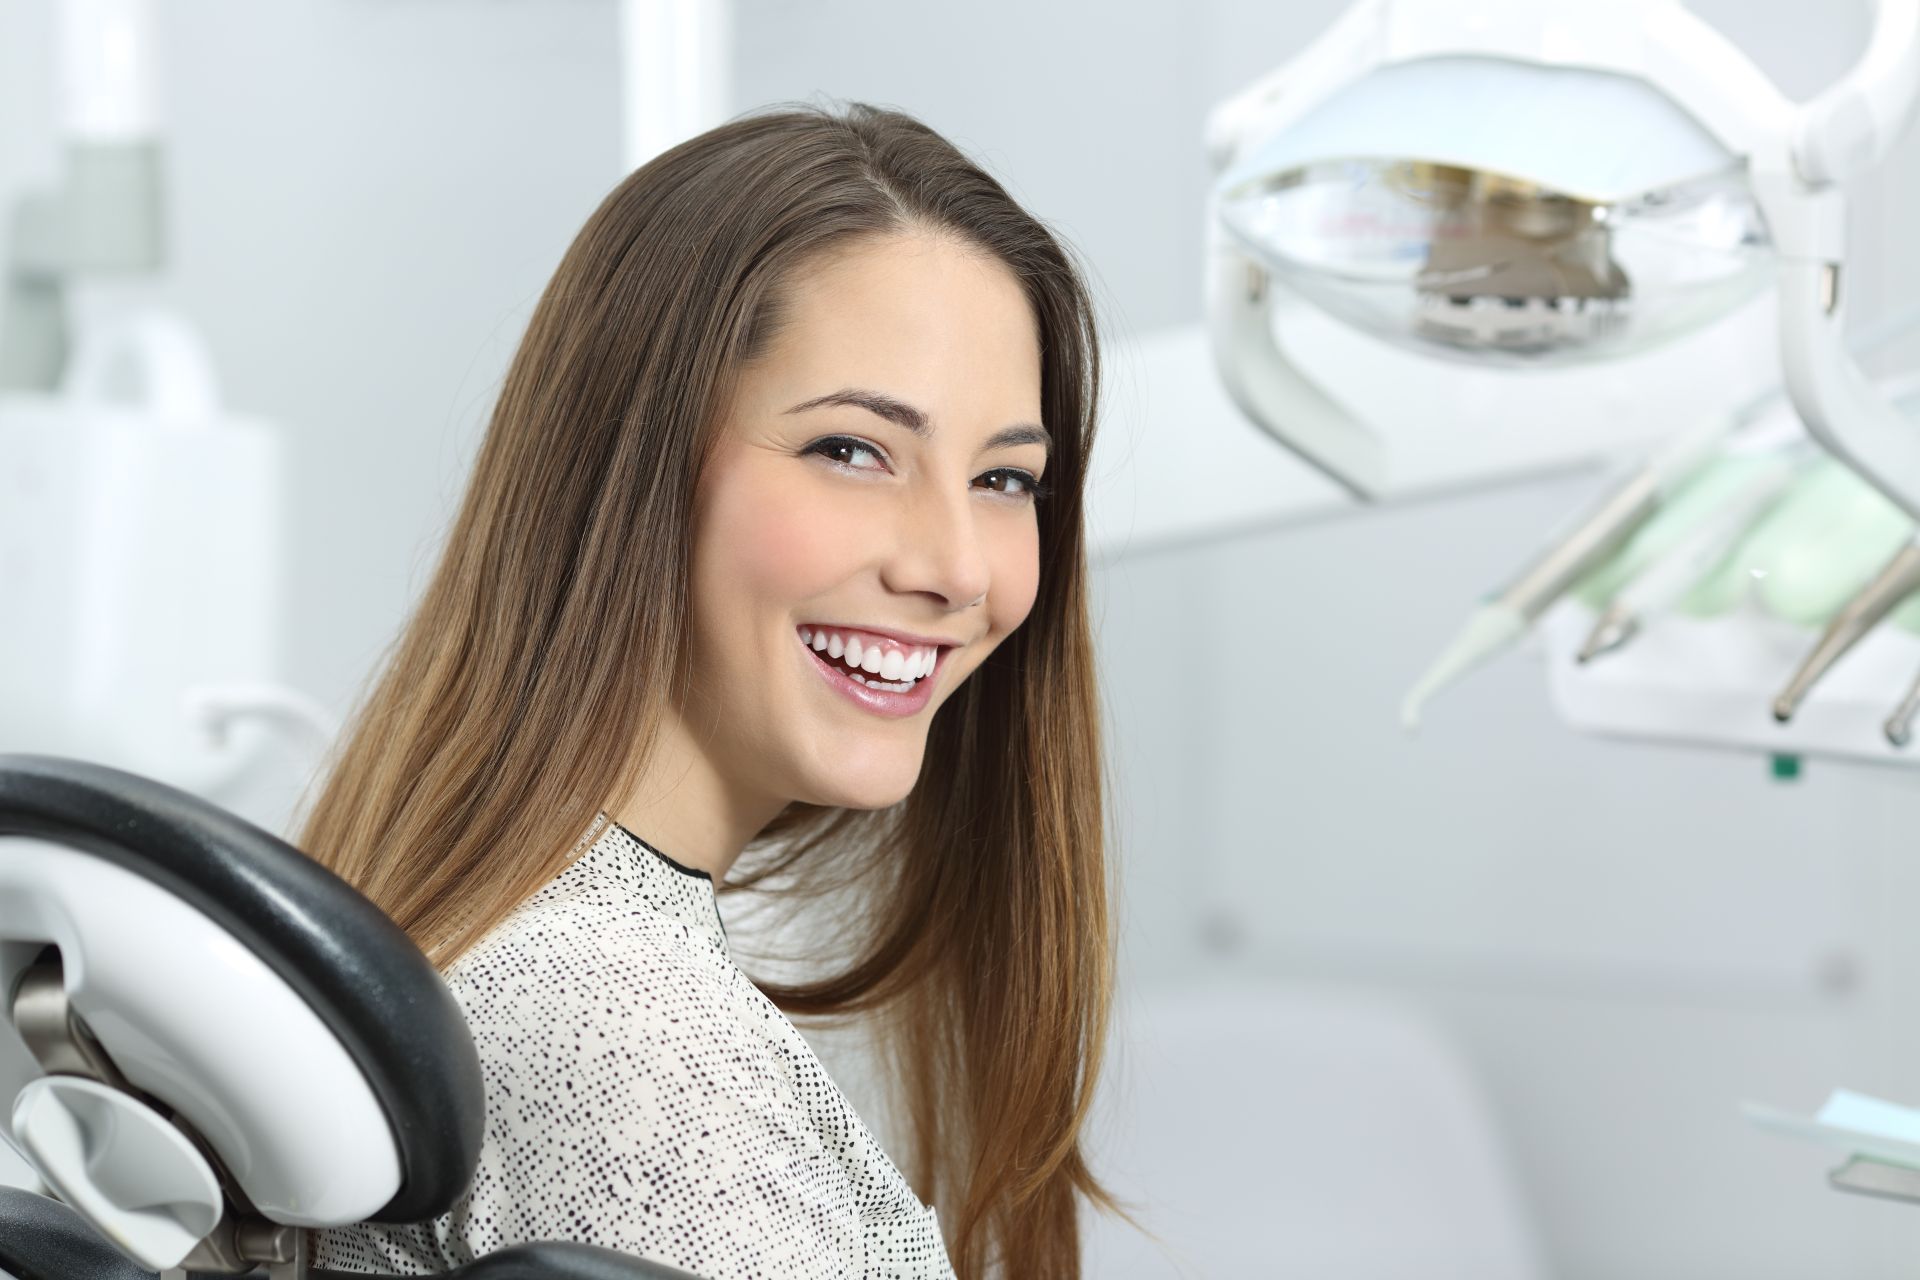 Restore Your Smile with Cosmetic Dentistry.